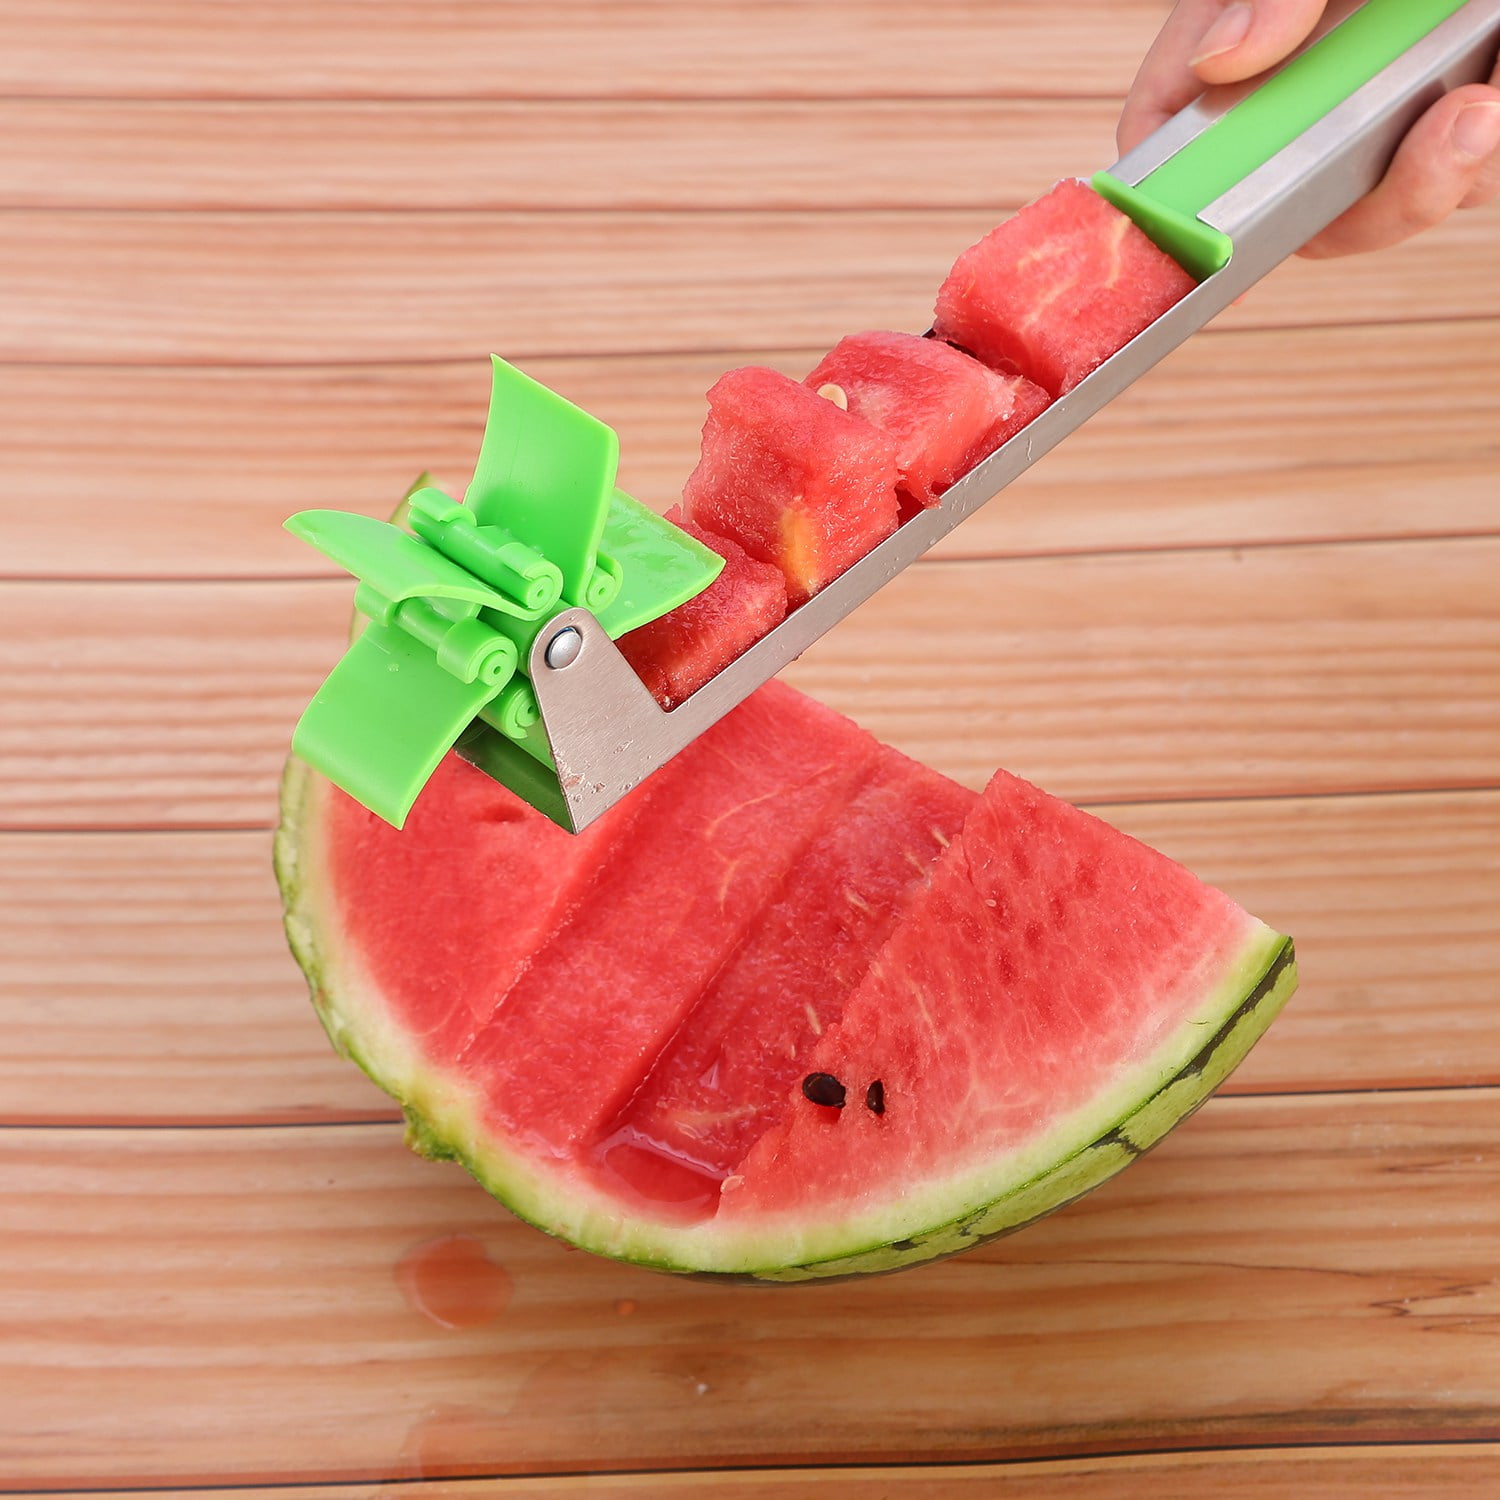 Fruit Watermelon Melon Cantaloupe Stainless Steel Cutter Slicer Kitchen Tool